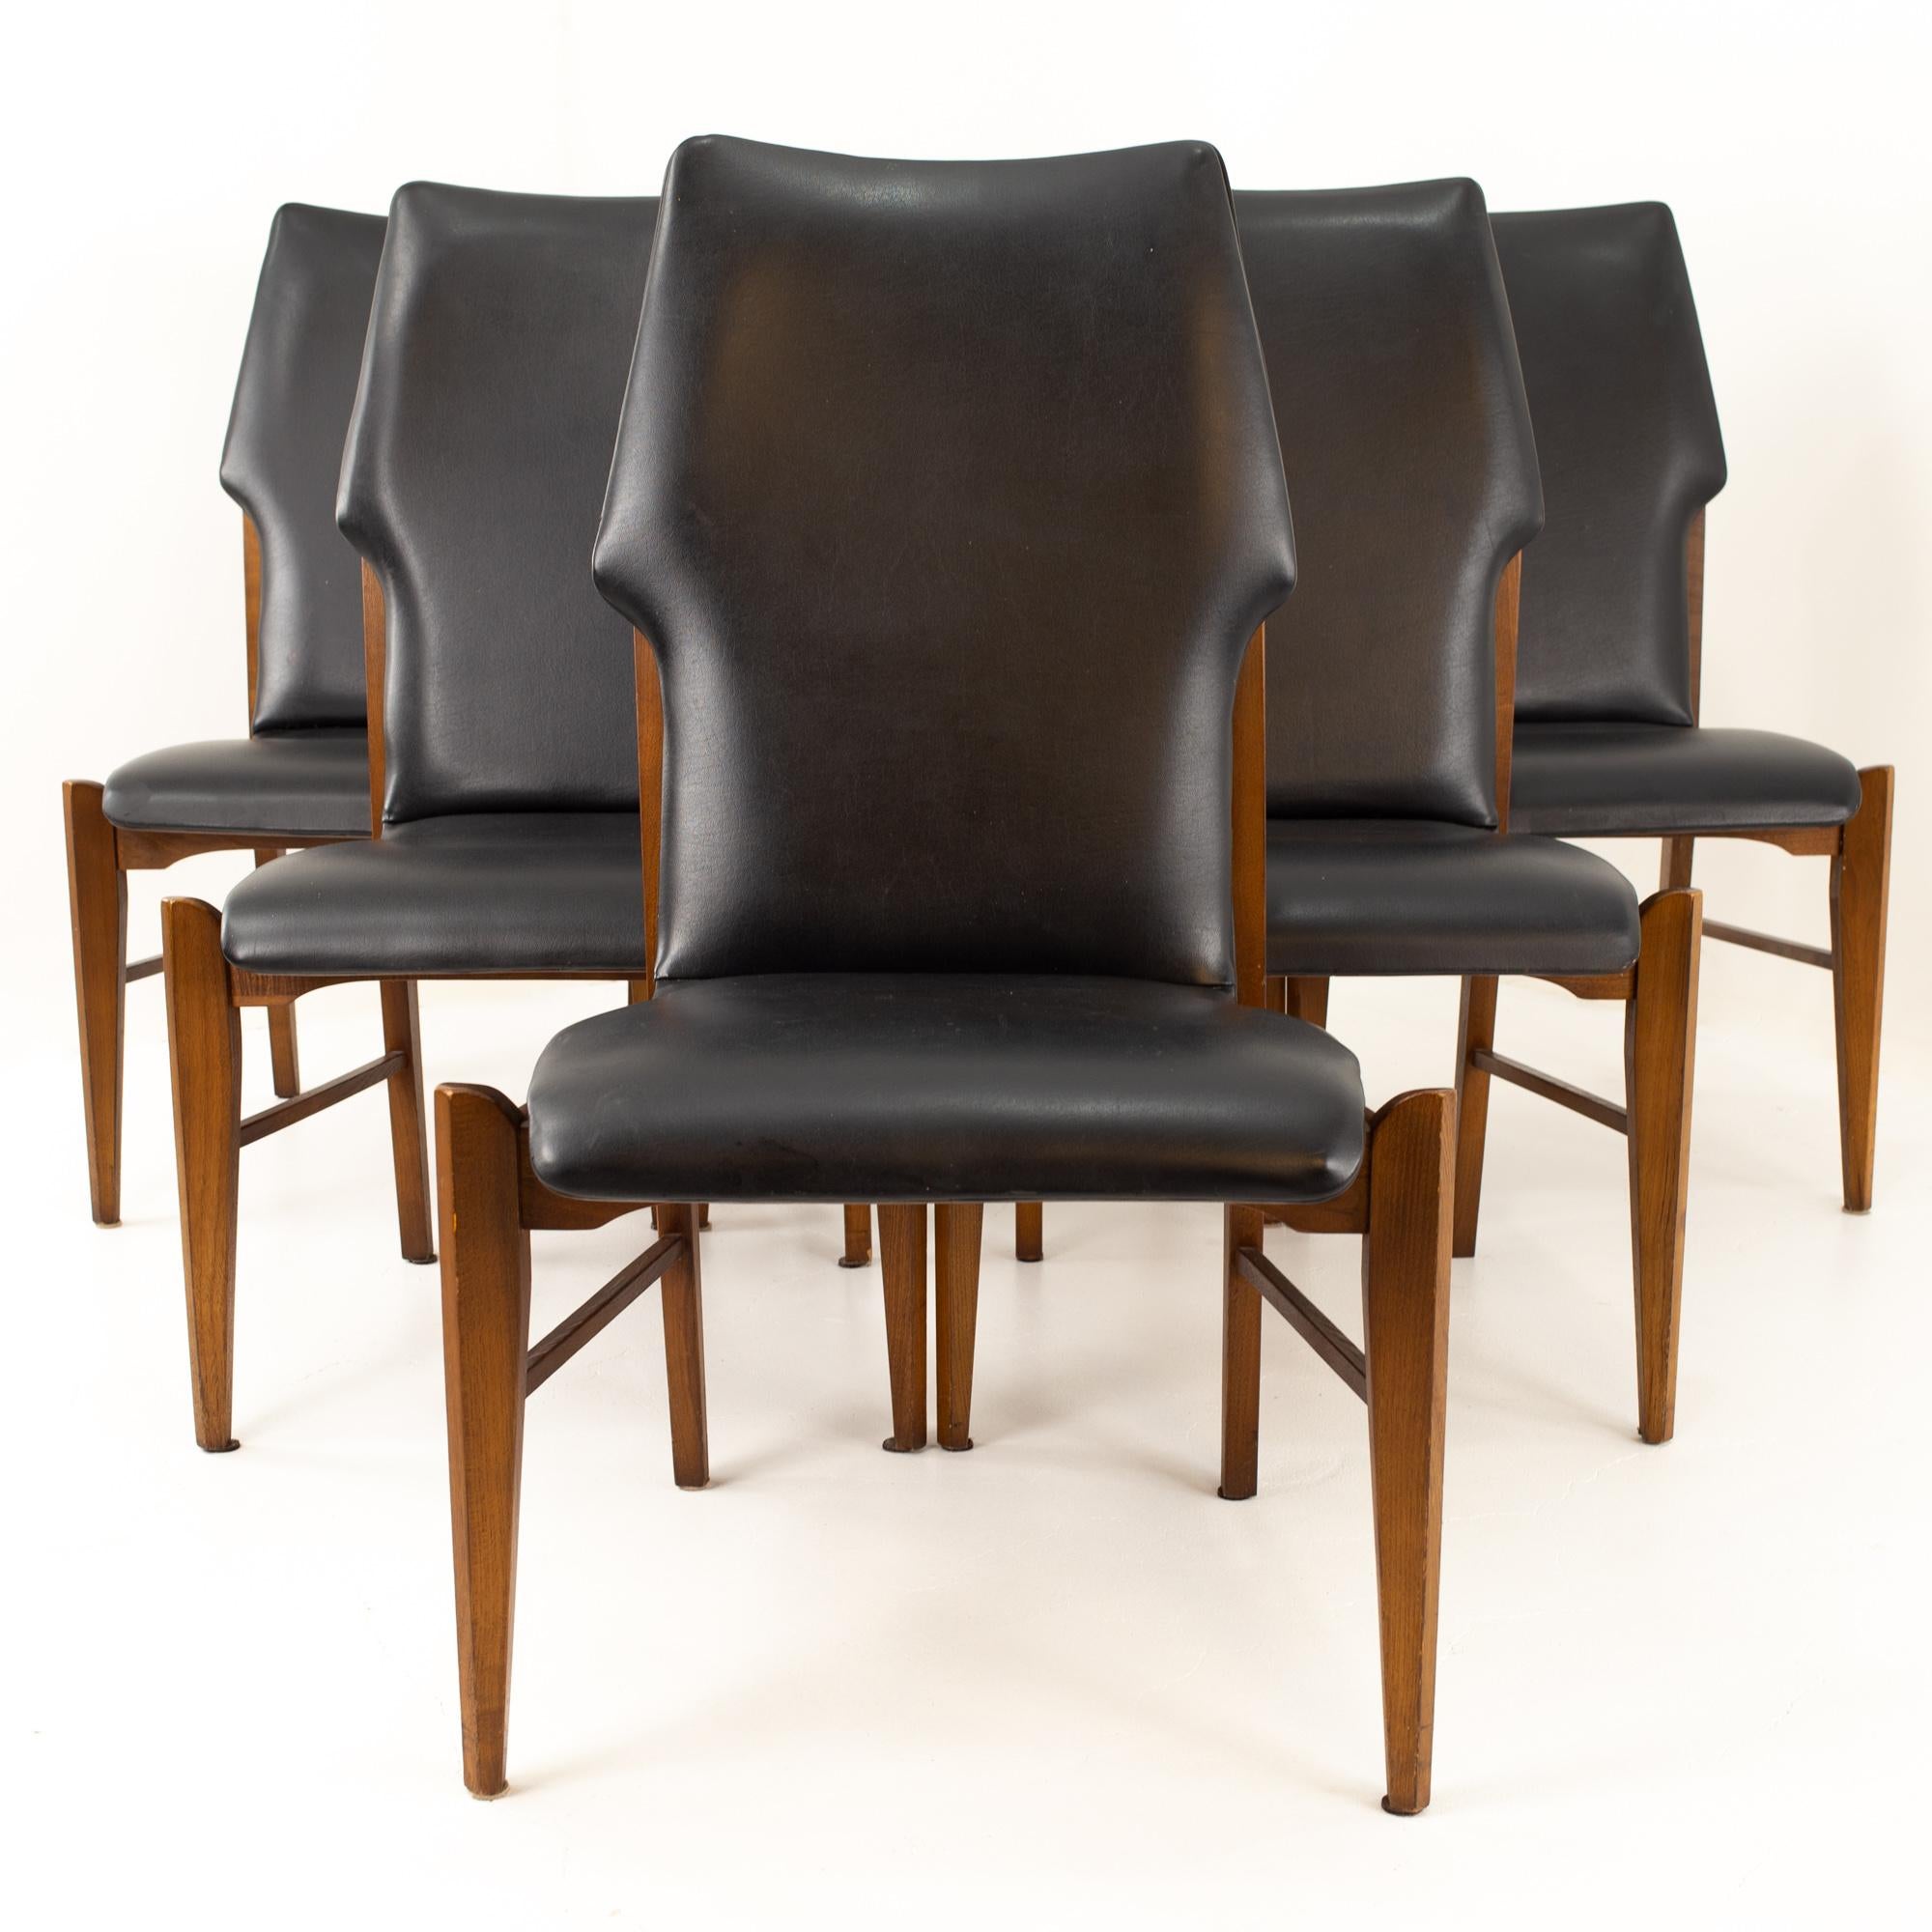 American Lane First Edition Mid Century Dining Chairs, Set of 6